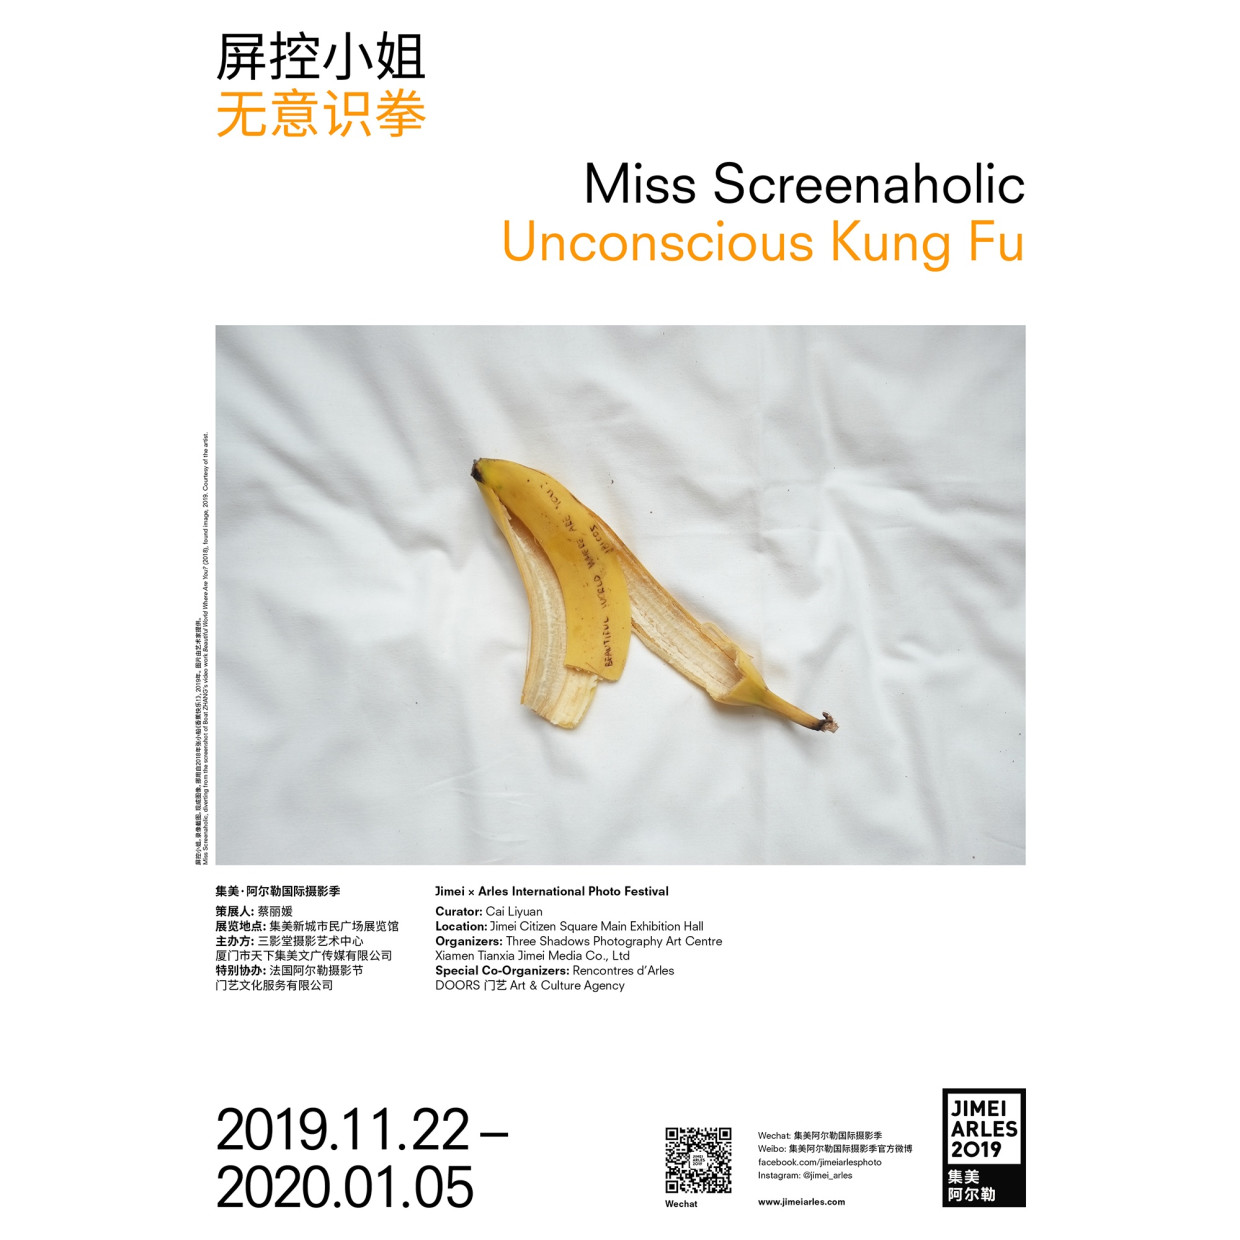 MISS SCREENAHOLIC UNCONSCIOUS KUNG FU CURATED BY CAI LIYUAN Miss Screenaholic is one of the many identities of this conceptual...